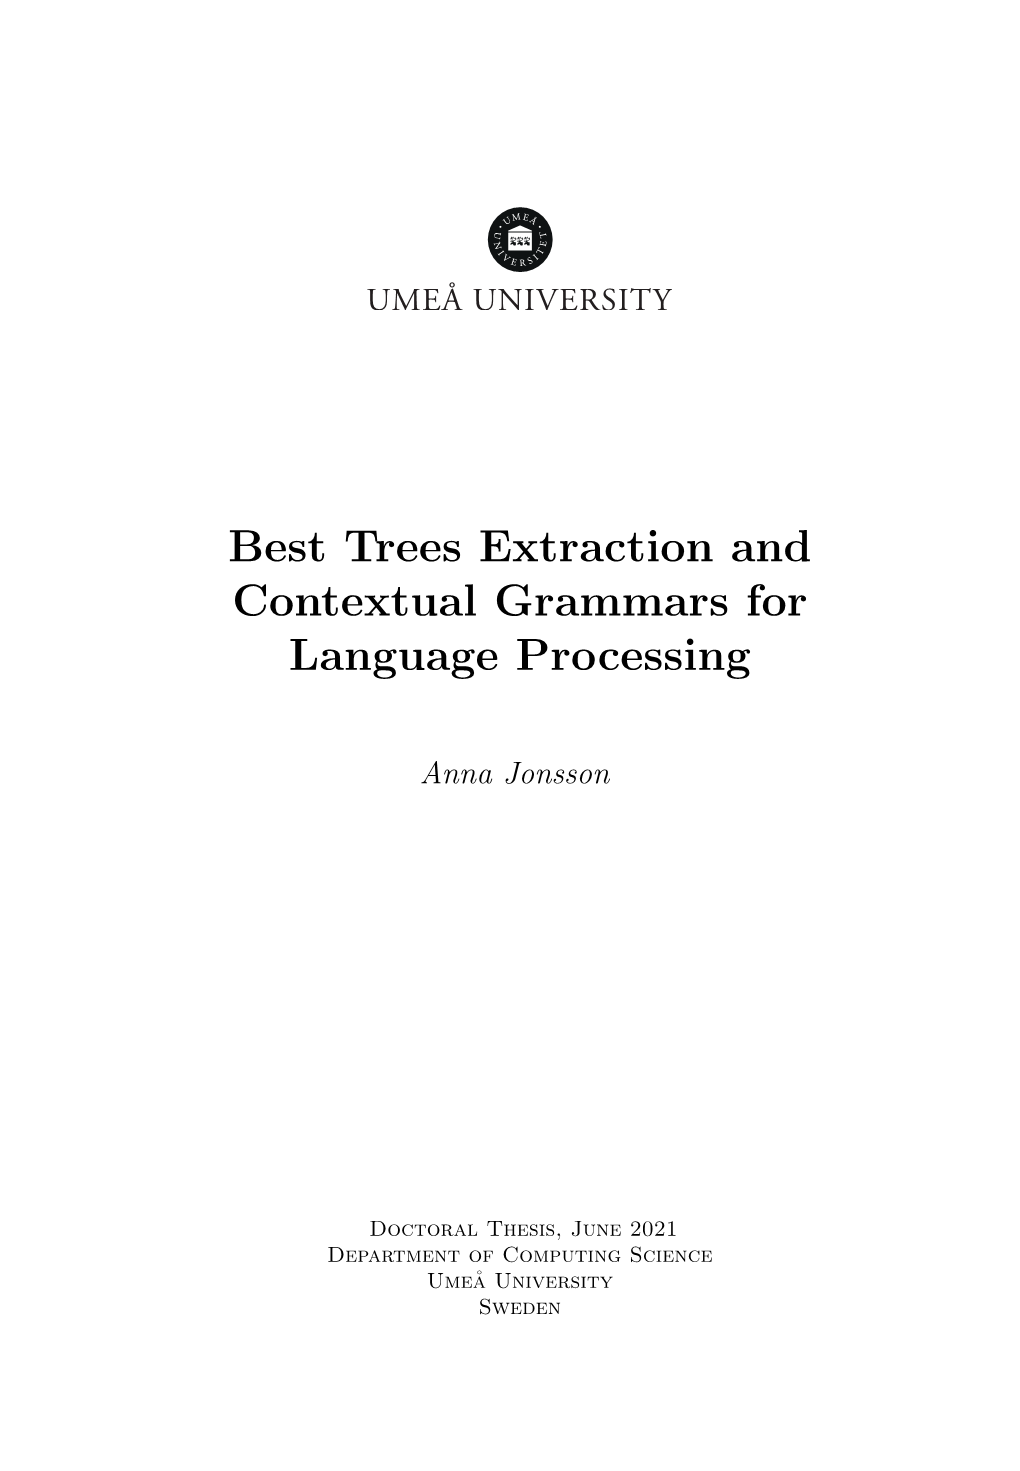 Best Trees Extraction and Contextual Grammars for Language Processing